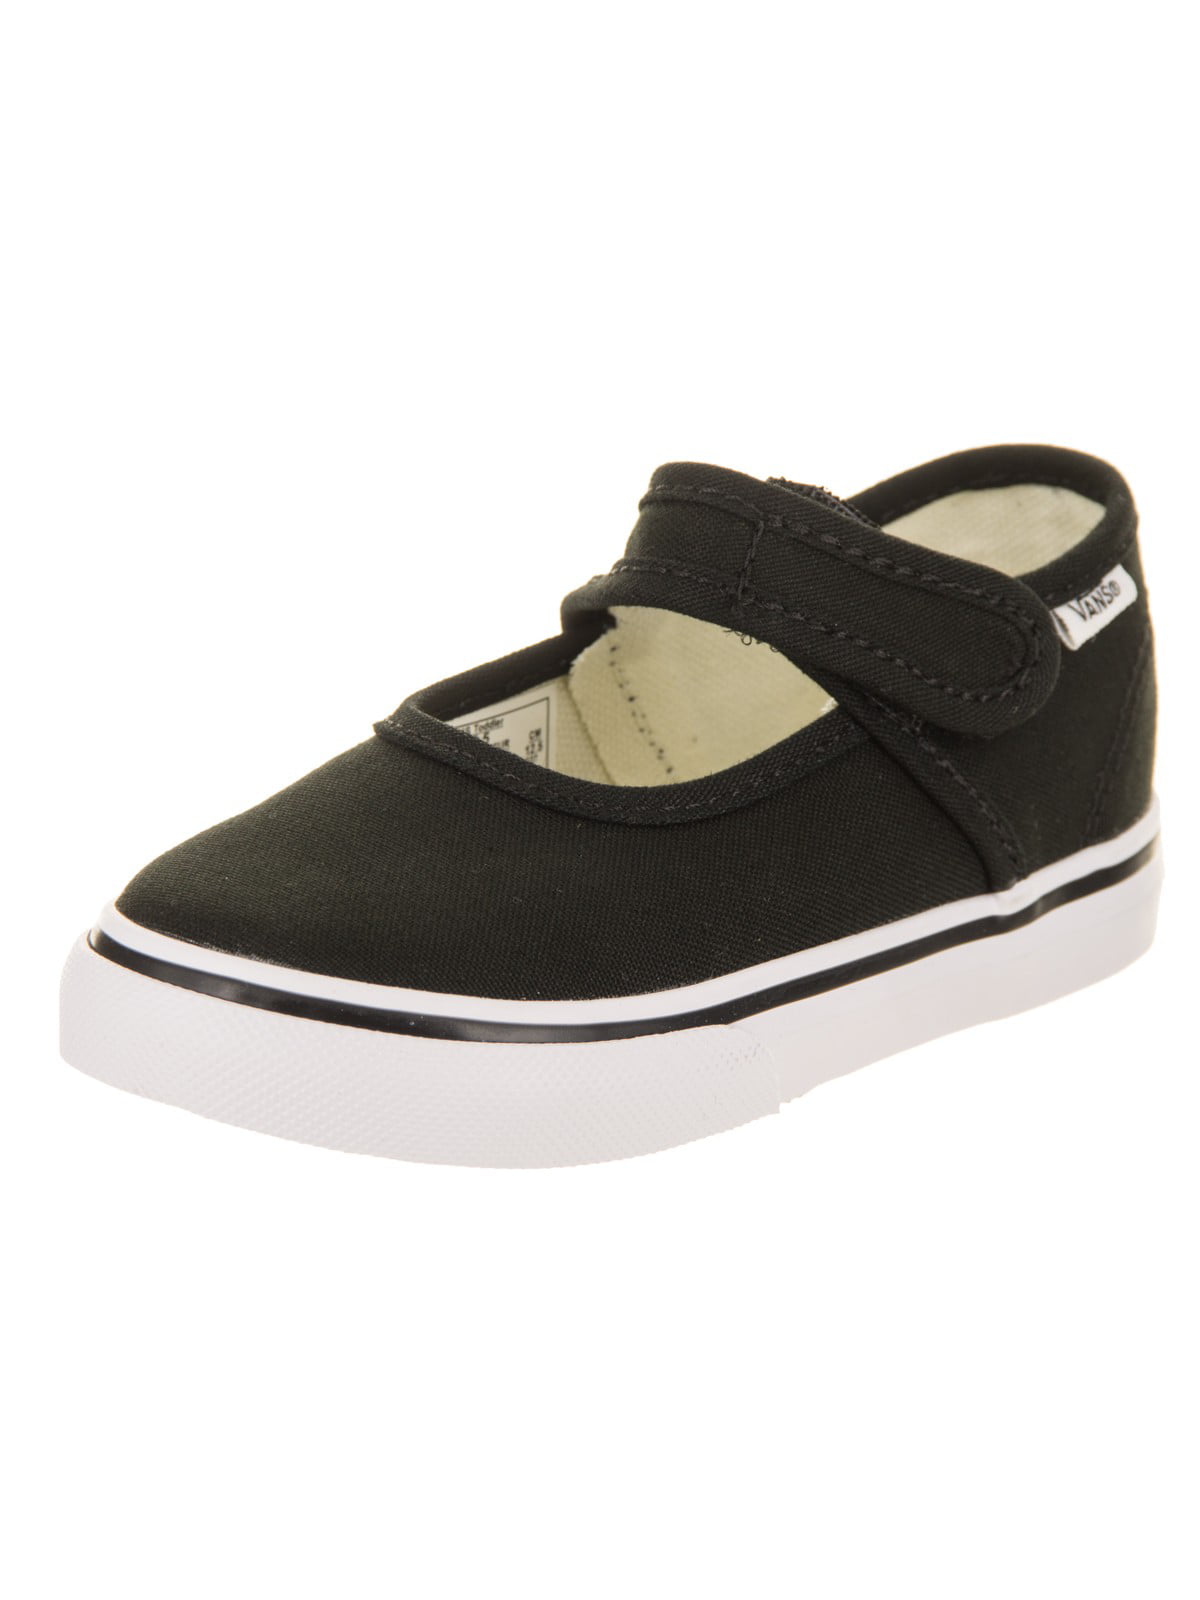 vans toddler mary janes